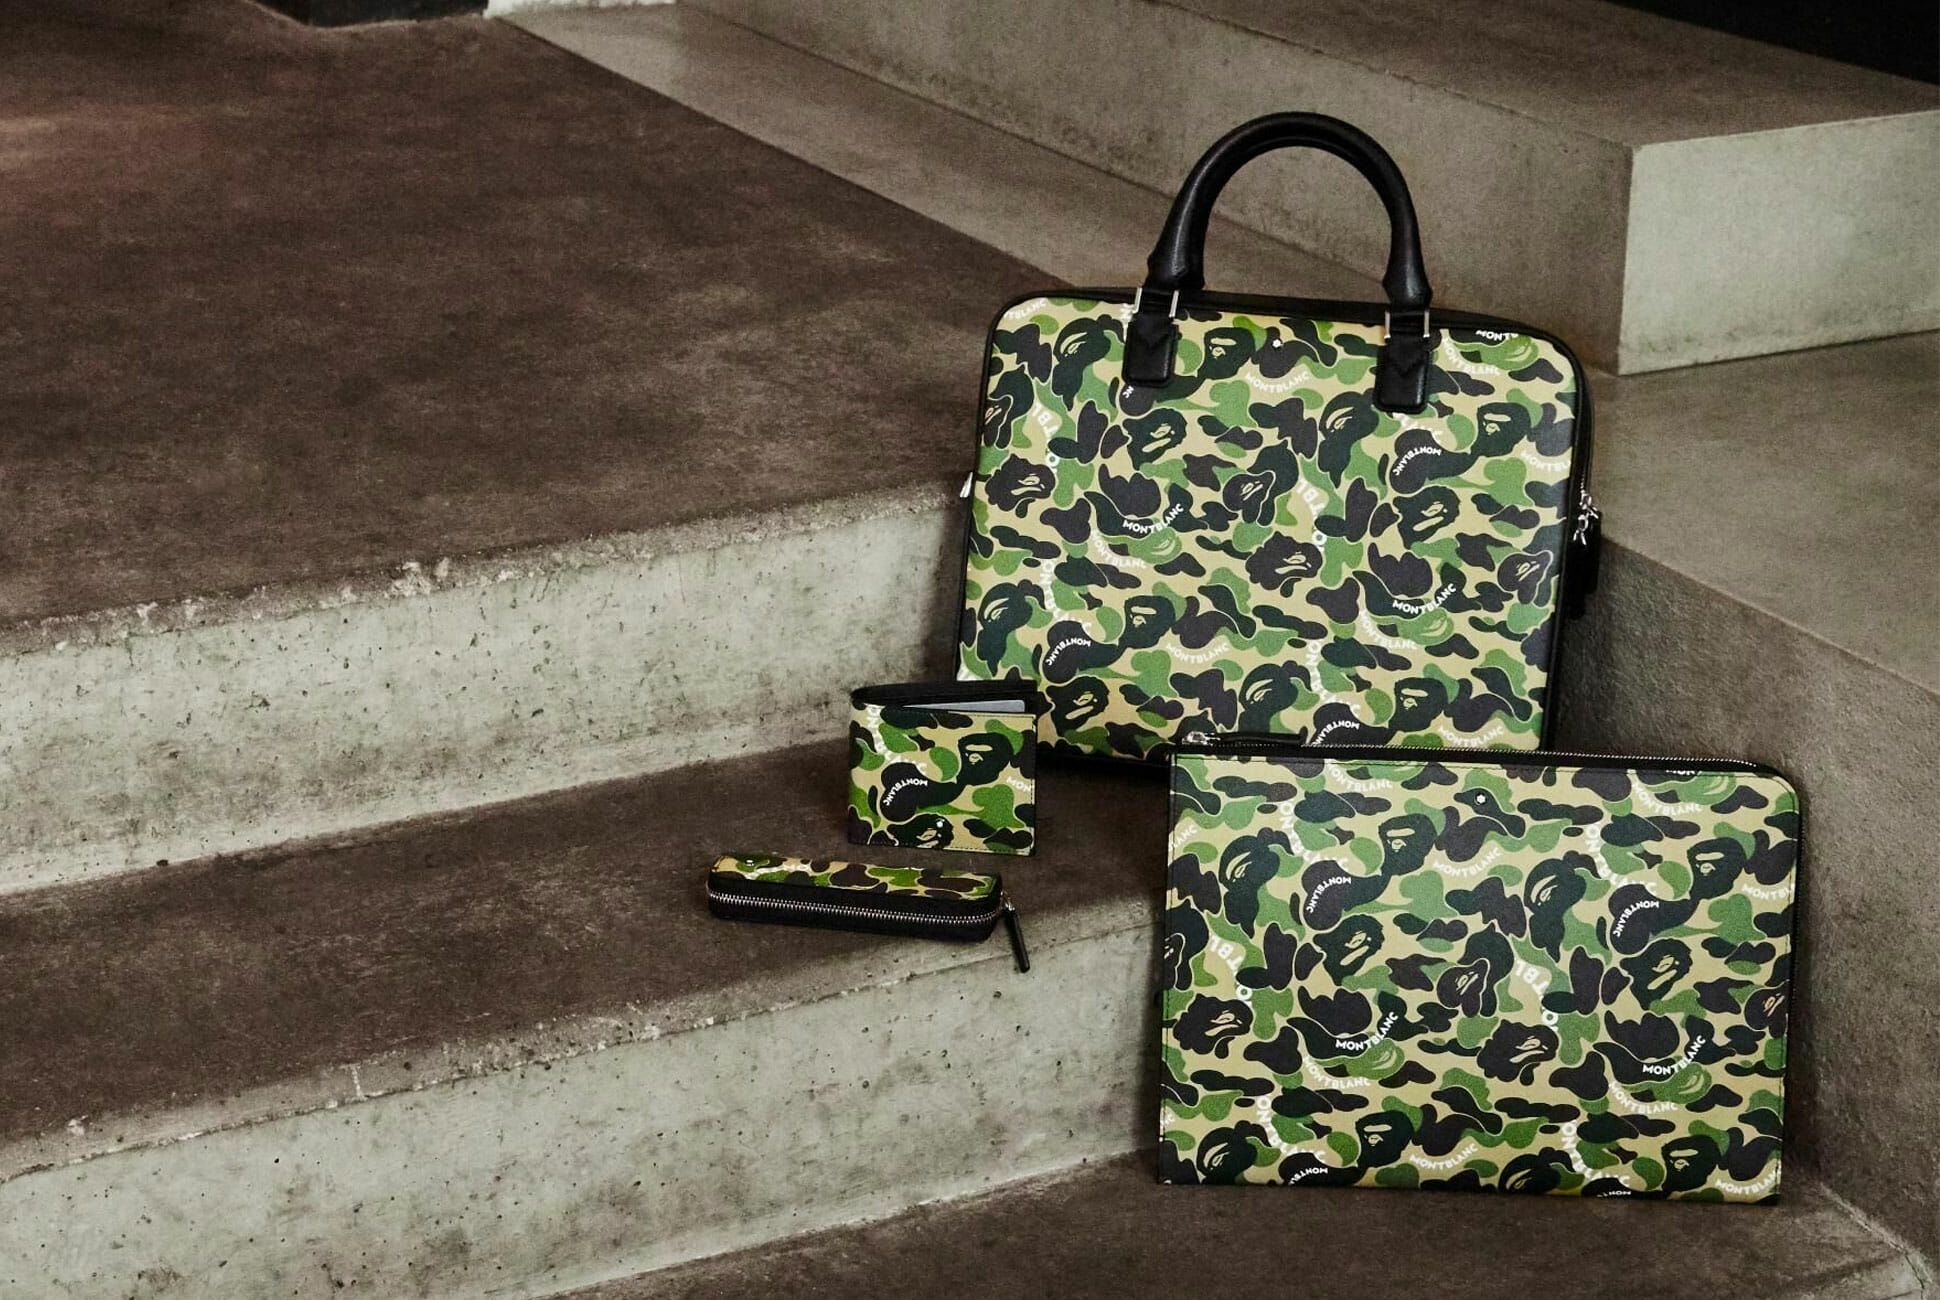 METCHA  BAPE x Montblanc to launch collab of luxe leather goods.